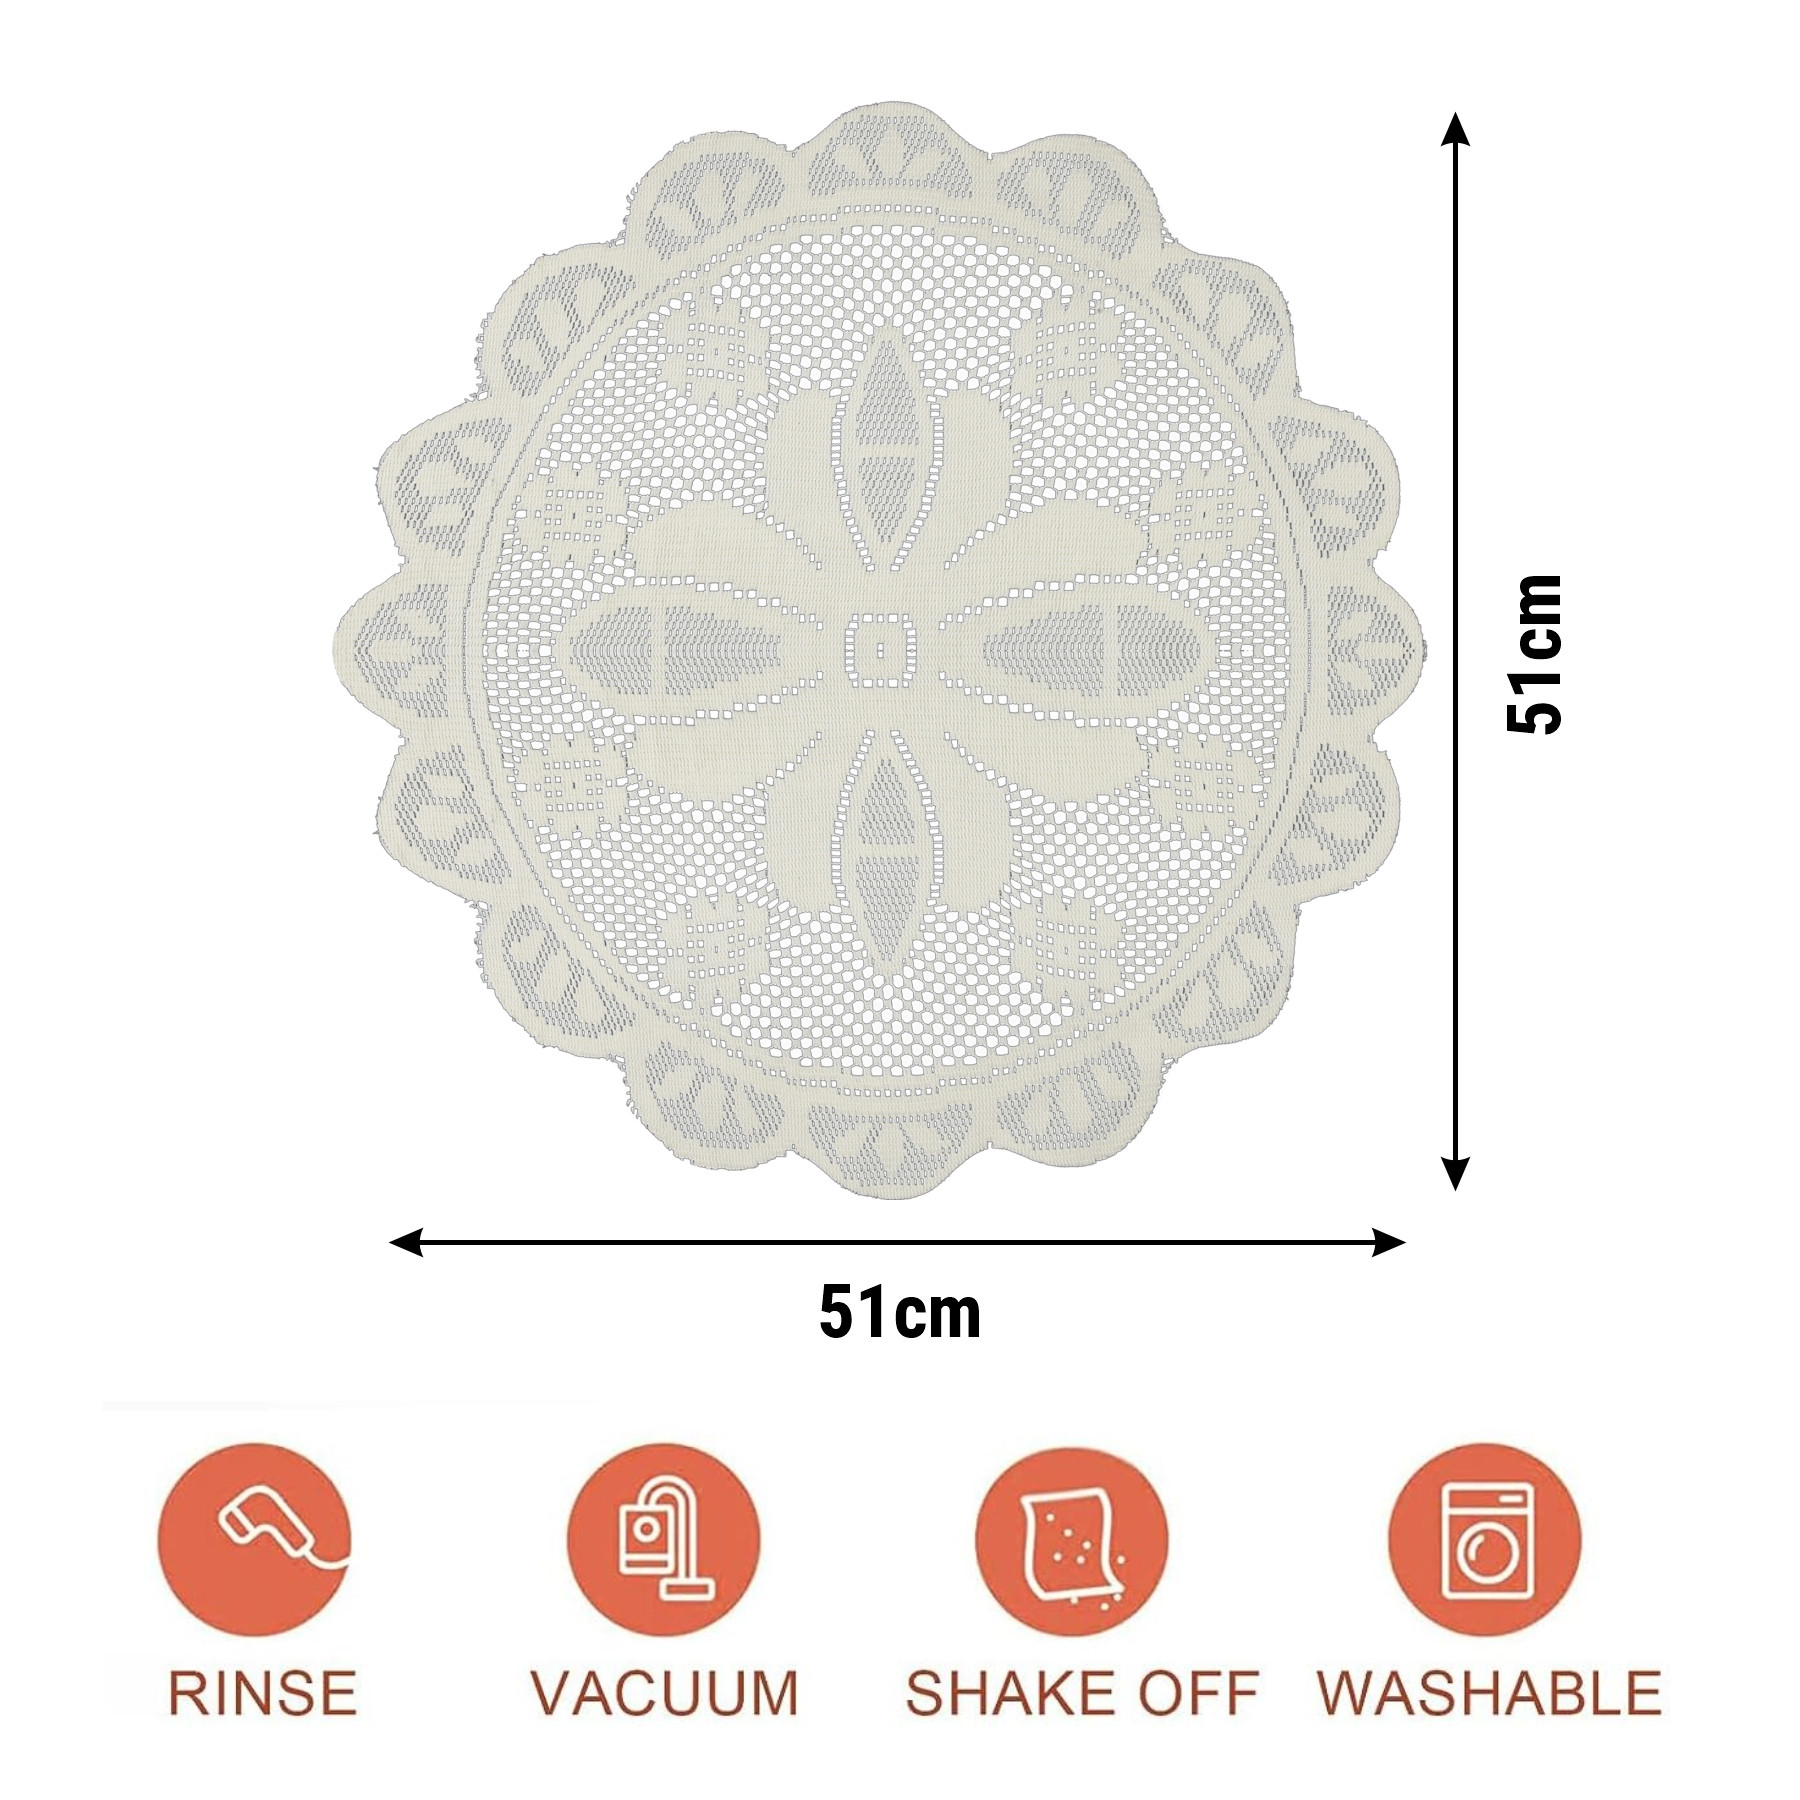 Kuber Industries Placemat | Dining Table Placemat | Center Table Mats | Round Plain Net Placemat Set | Side Table Placemats for Hotel-Home Décor | 20 Inch |Light Cream